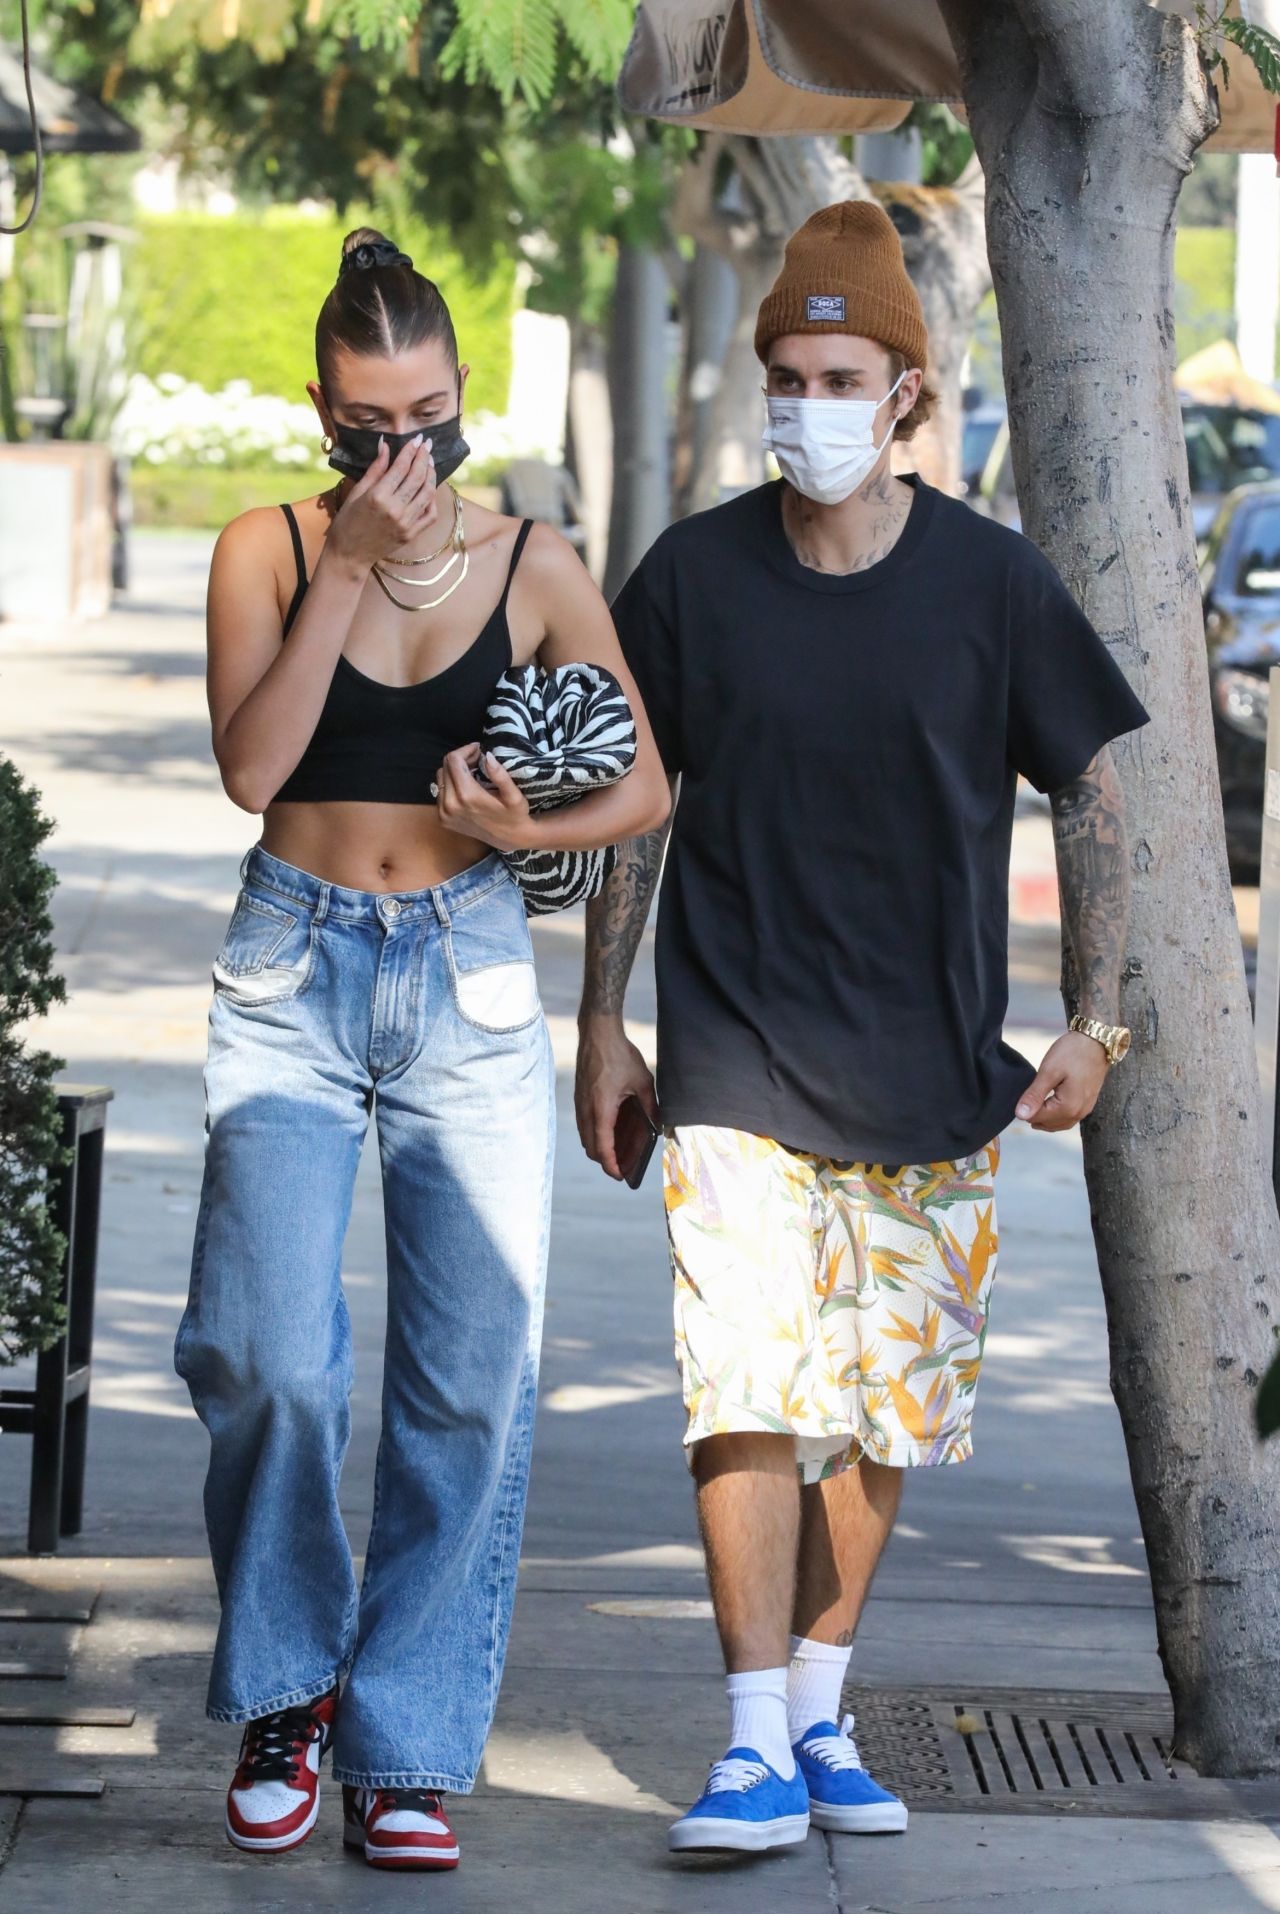 hailey-bieber-and-justin-bieber-at-il-pastaio-in-beverly-hill-10-06-2020-5.jpg